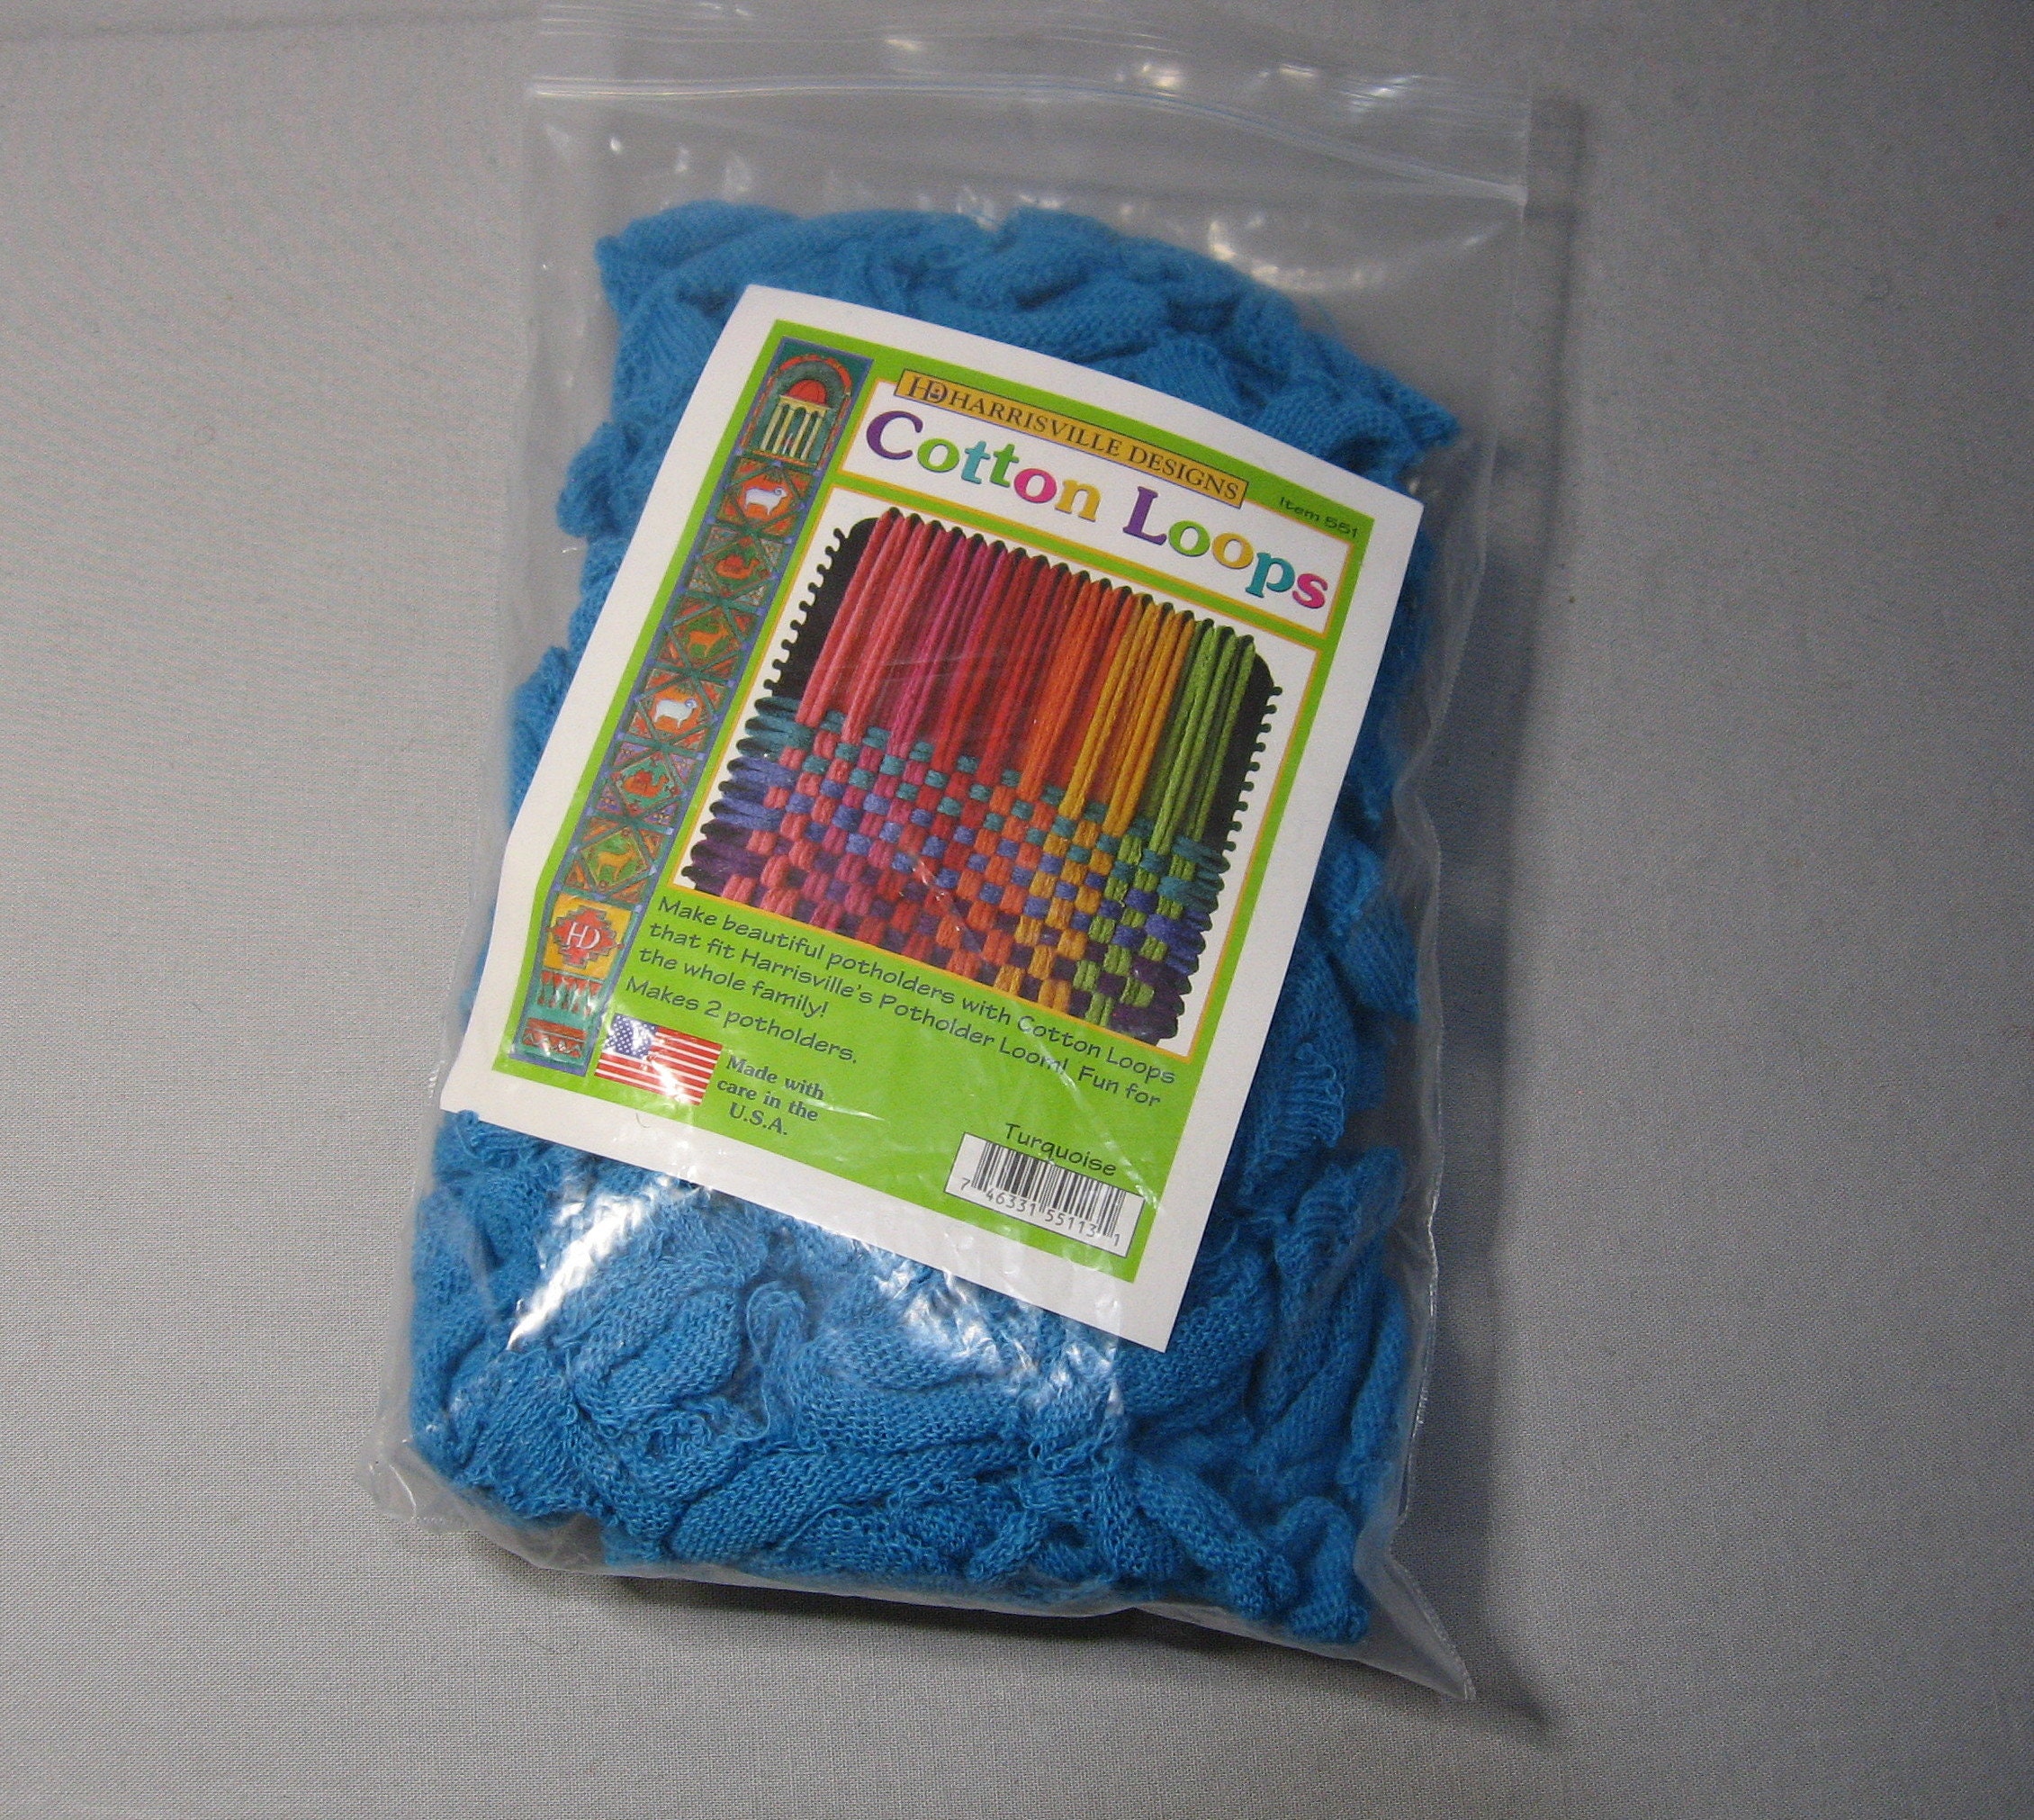 Loops for 7 Pot Holder Weaving Looms, Mini Pack by Friendly Loom™,  Traditional Size, Cotton Loopers, Weaving Loops, Potholder Loom Refills, 